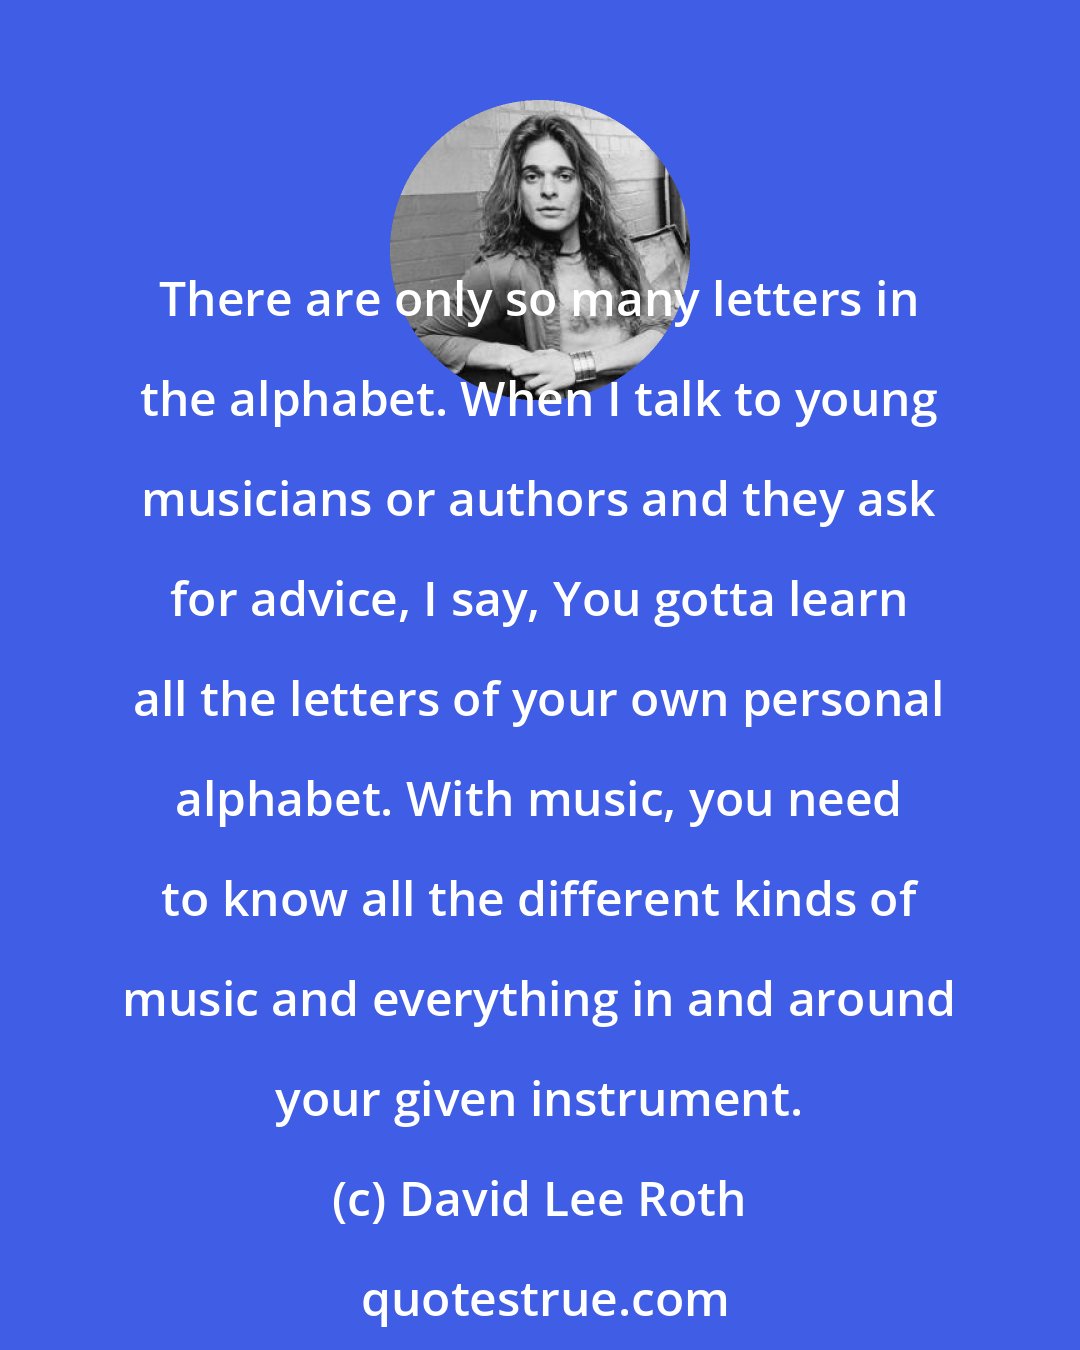 David Lee Roth: There are only so many letters in the alphabet. When I talk to young musicians or authors and they ask for advice, I say, You gotta learn all the letters of your own personal alphabet. With music, you need to know all the different kinds of music and everything in and around your given instrument.